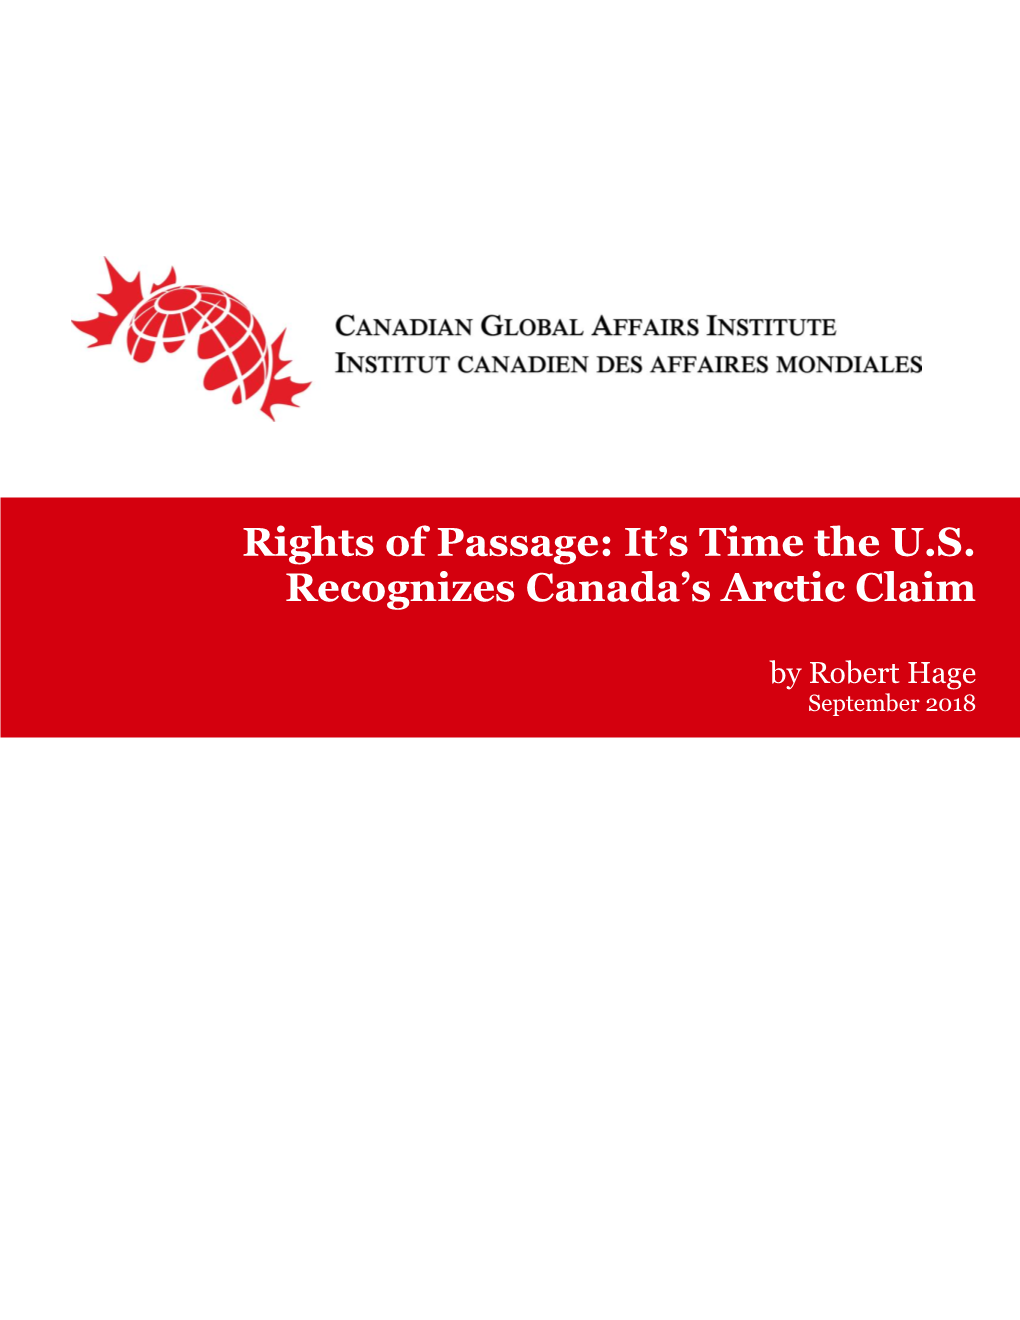 Rights of Passage: It's Time the US Recognizes